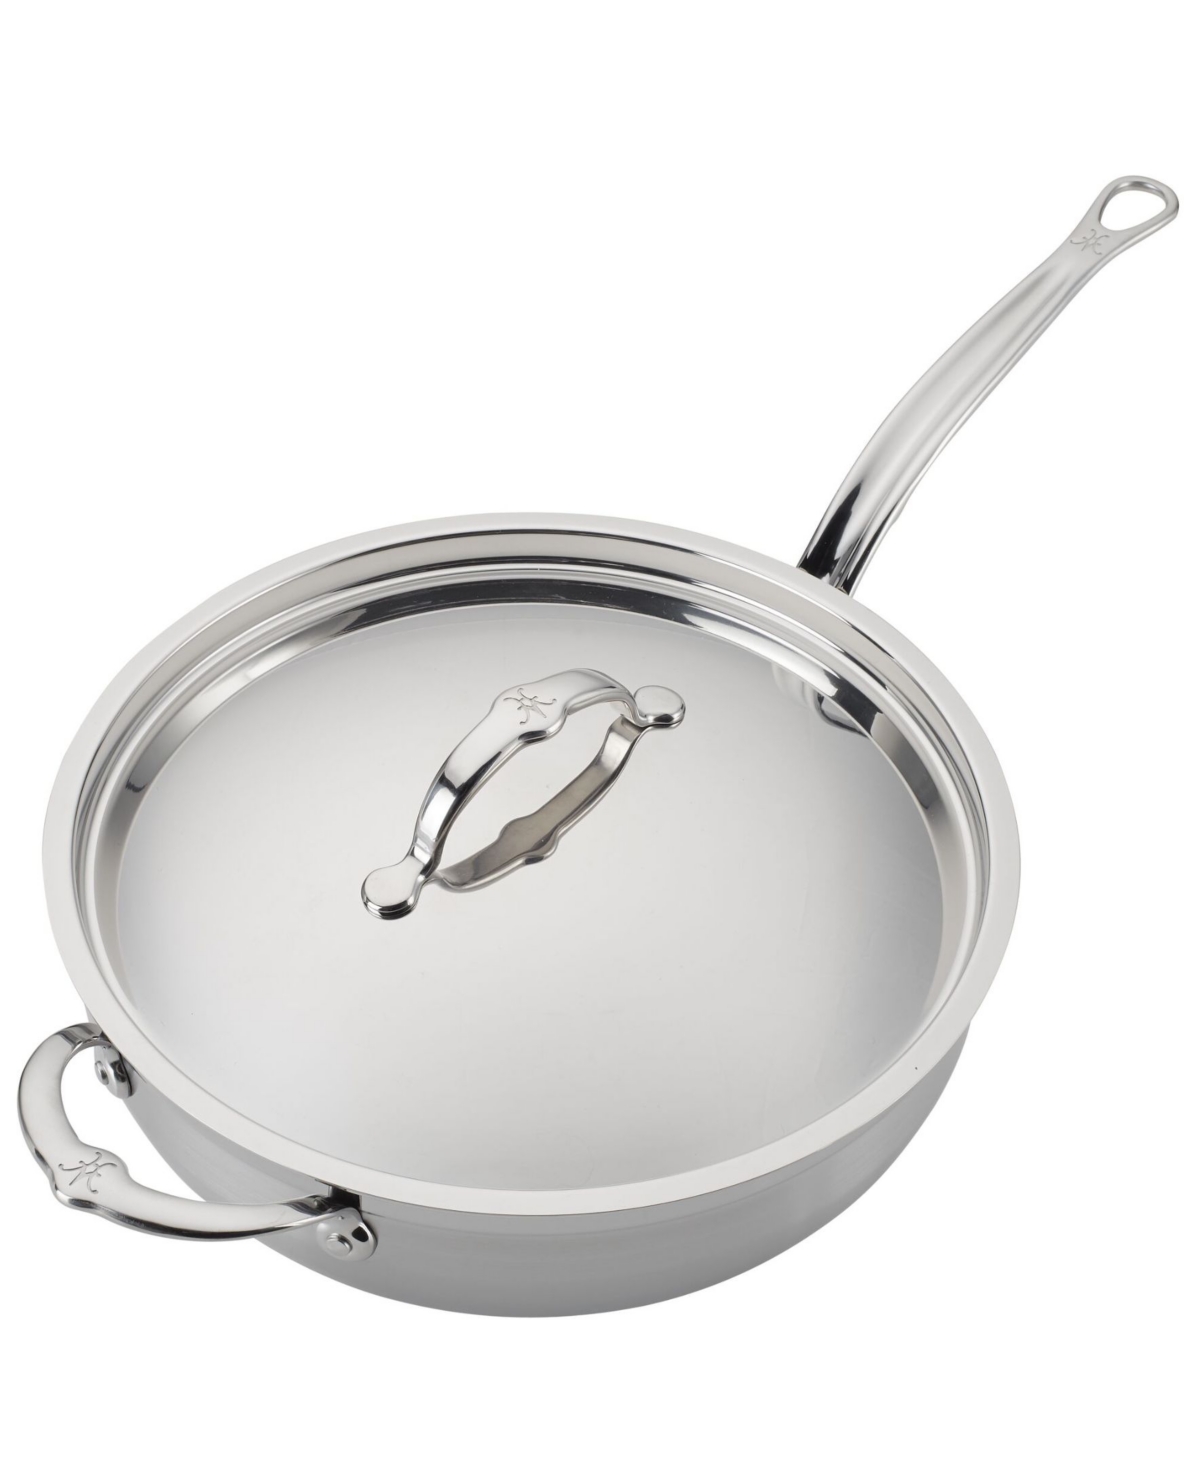 Shop Hestan Probond Clad Stainless Steel 5-quart Covered Essential Pan With Helper Handle In Silver